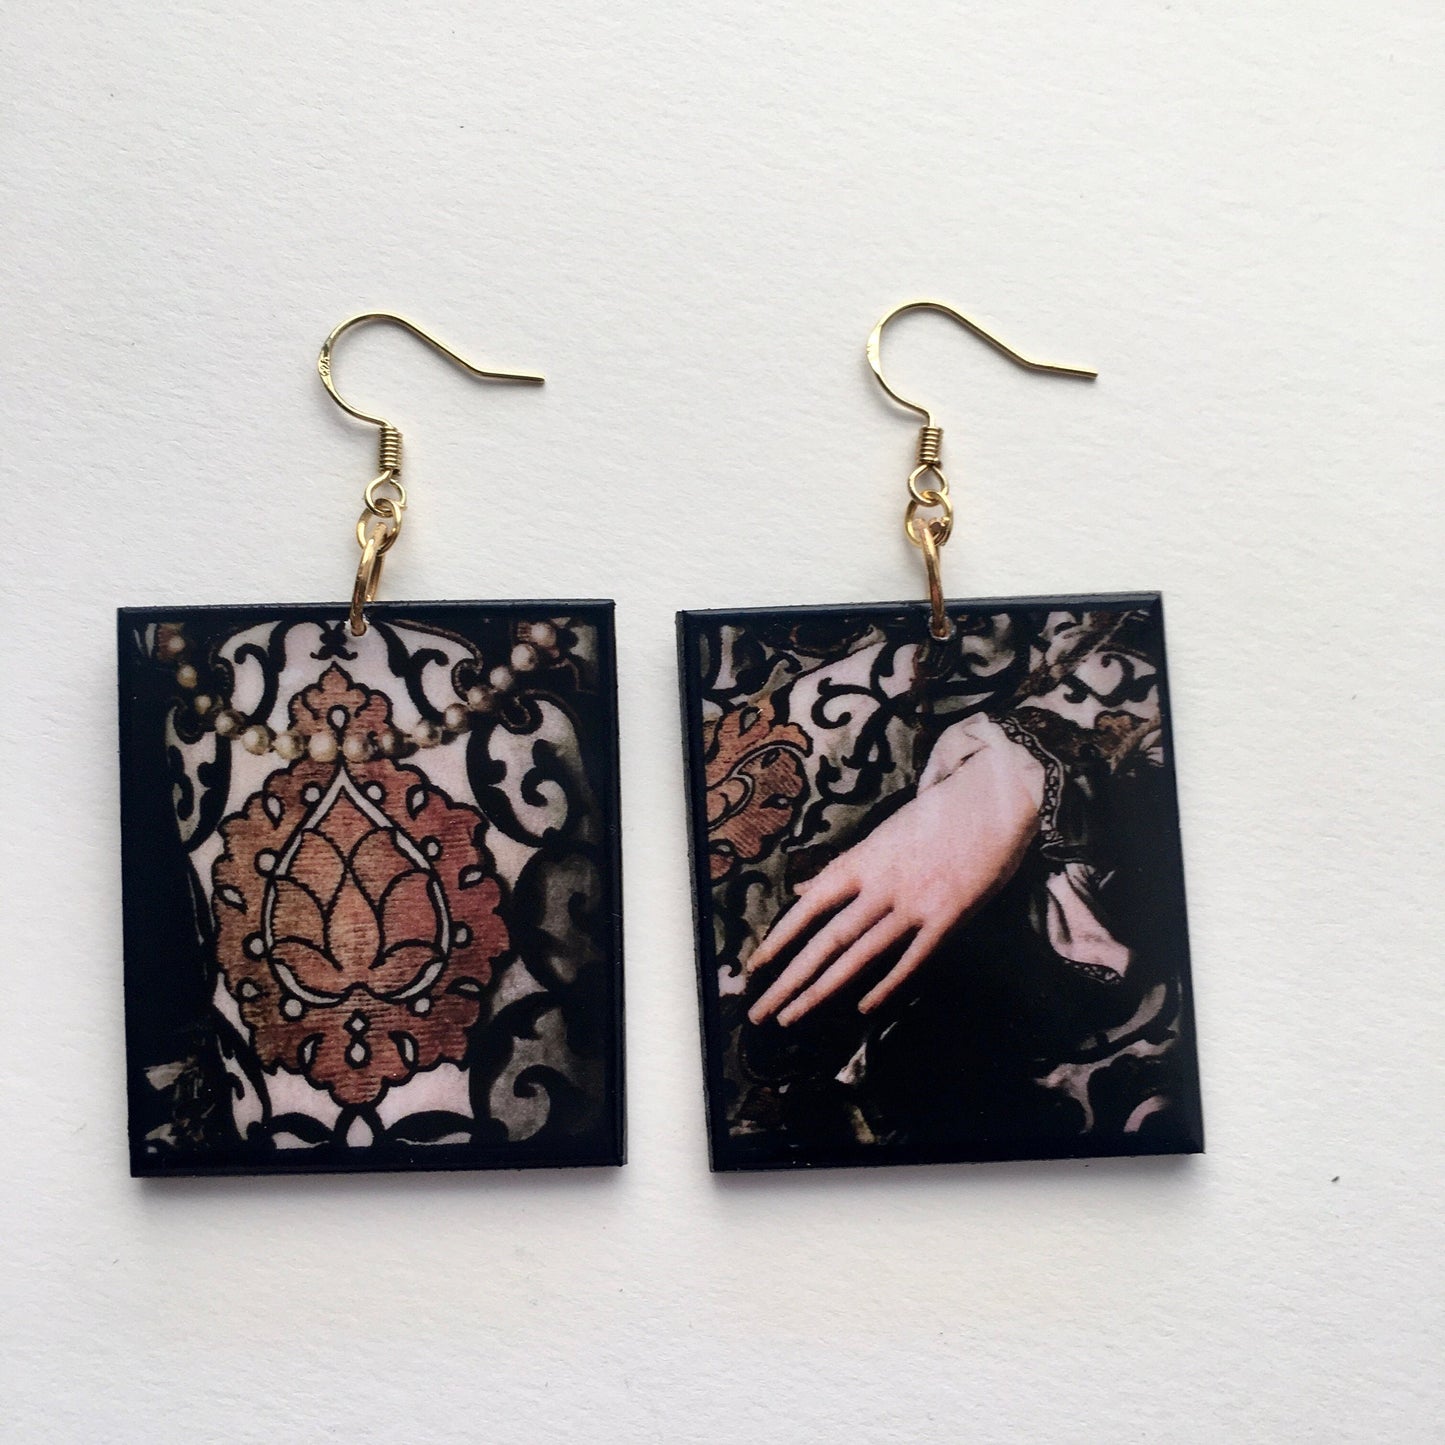 Agnolo Bronzino art details earrings, Wood earrings artsy gift for her, Mannerism style earrings. Gold and white dress fabric painting.